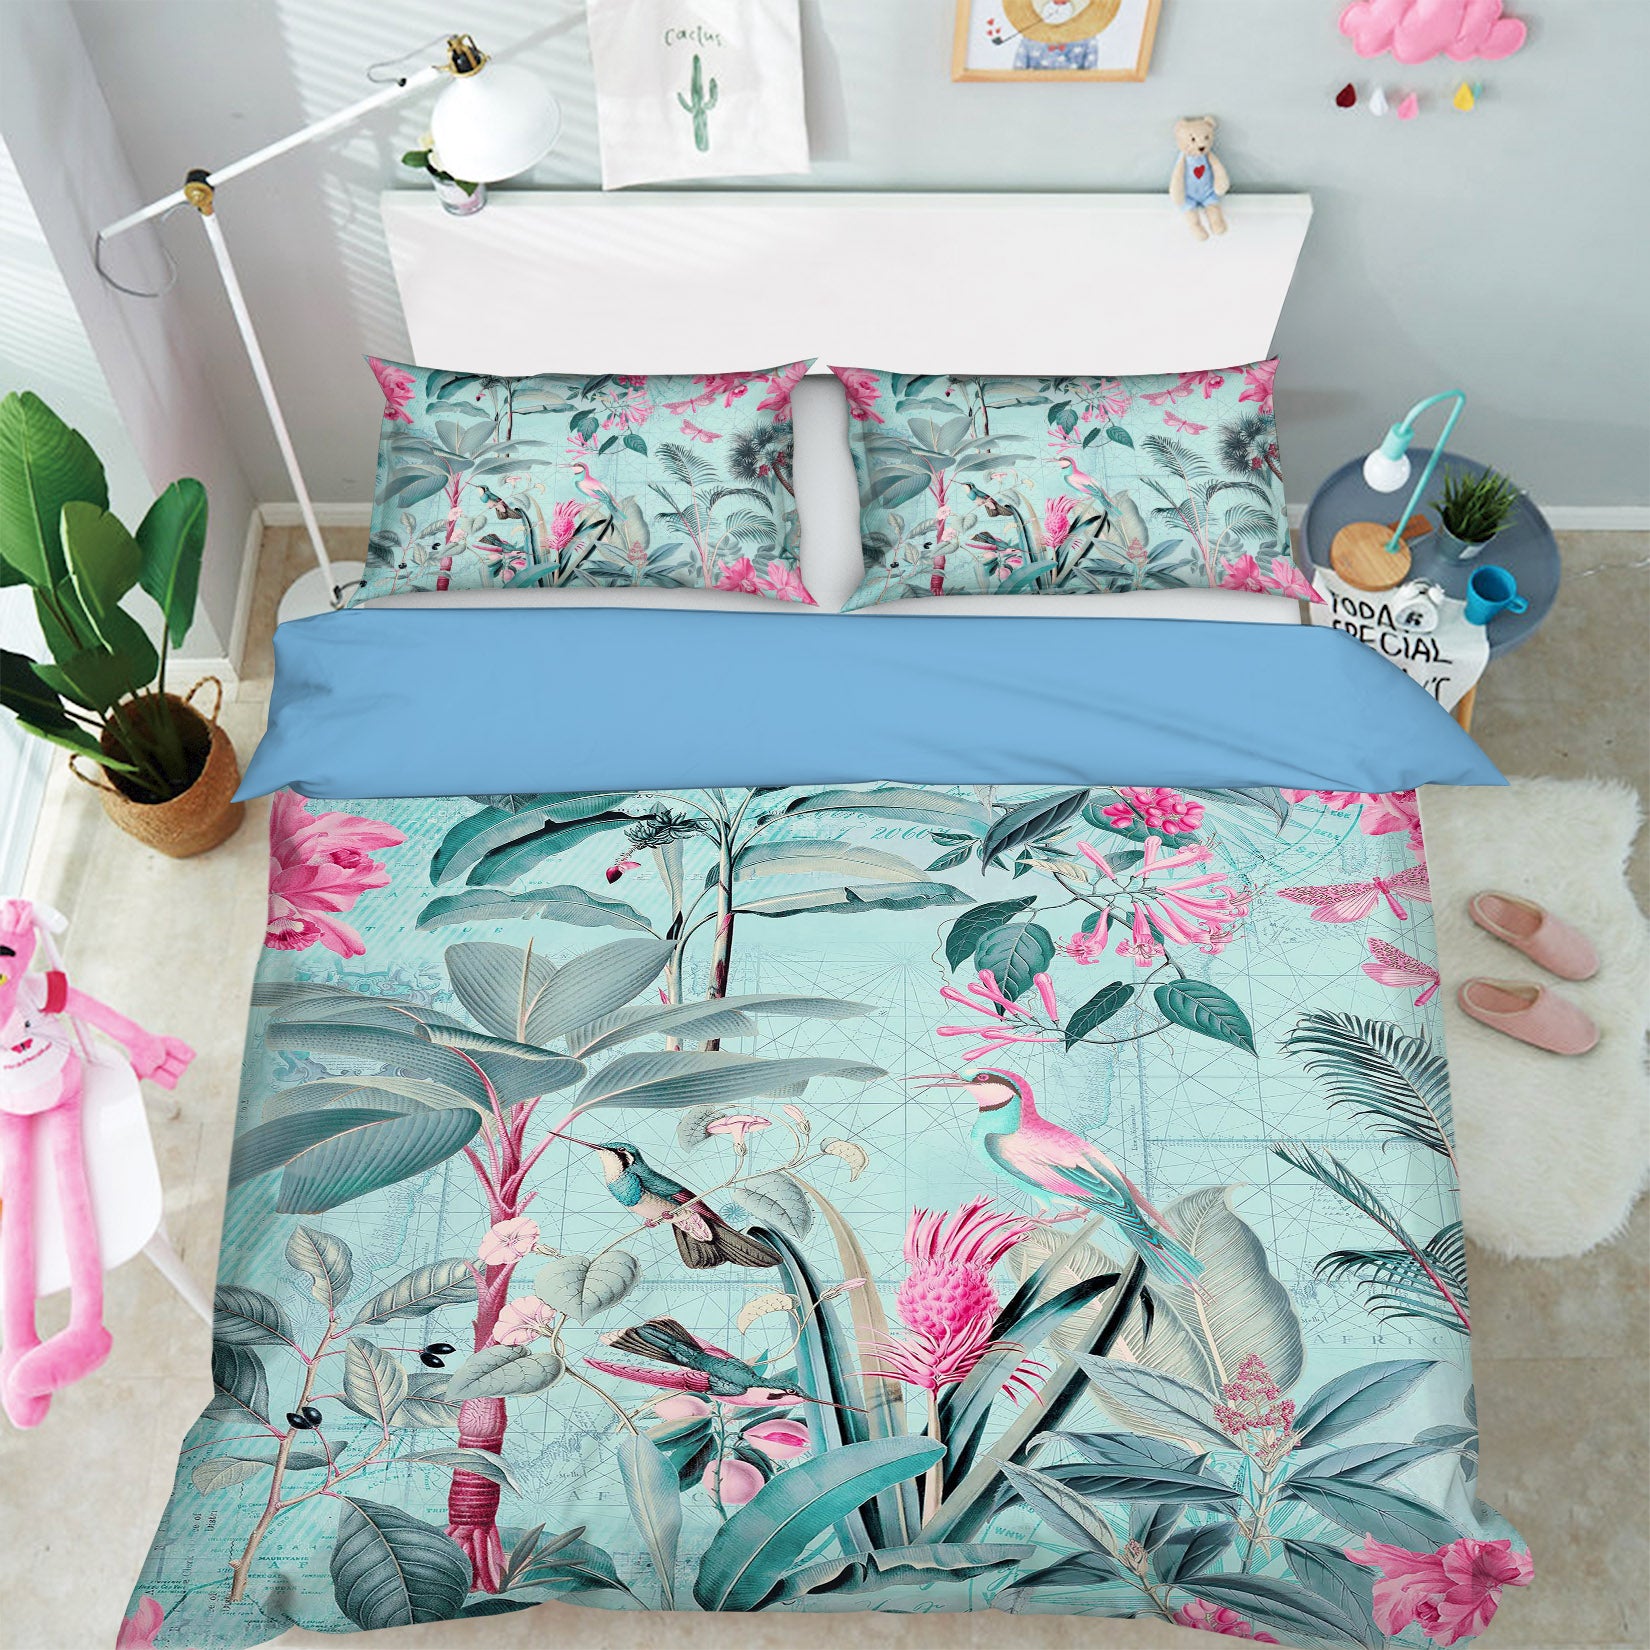 3D Bird Singing 129 Andrea haase Bedding Bed Pillowcases Quilt